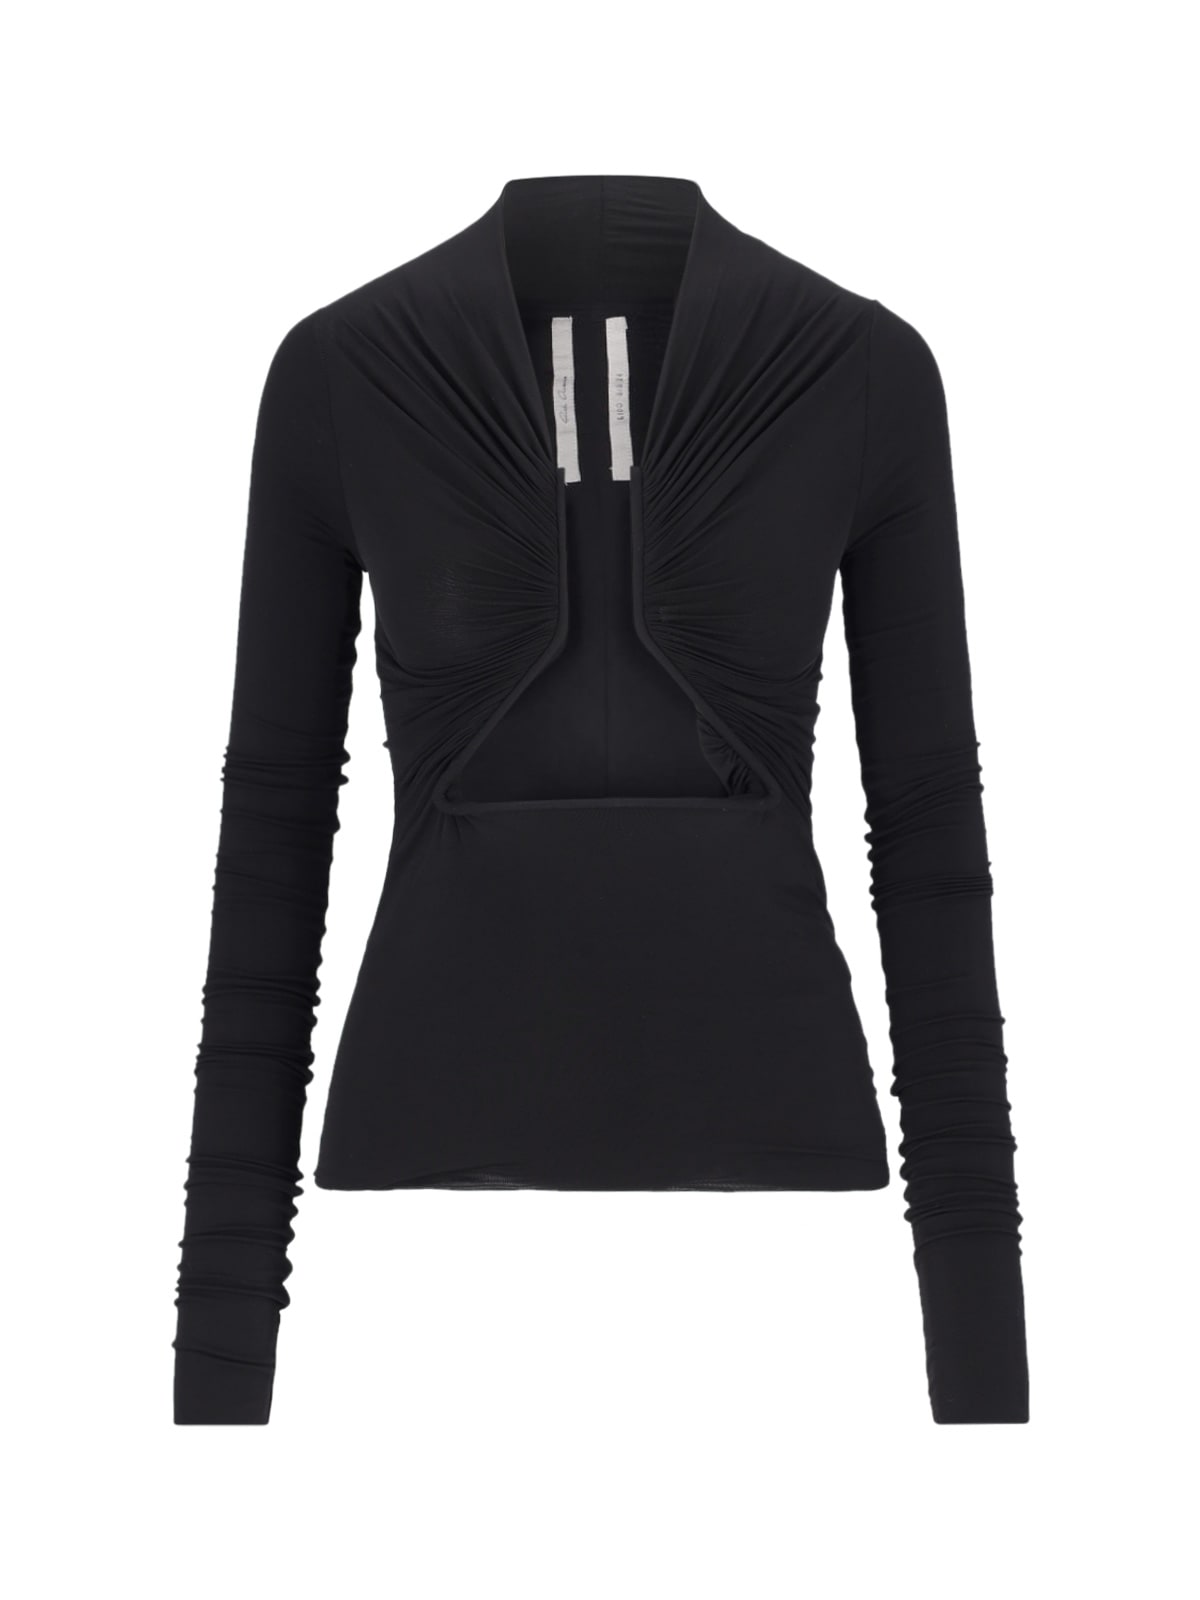 RICK OWENS CUT-OUT DETAIL SWEATER